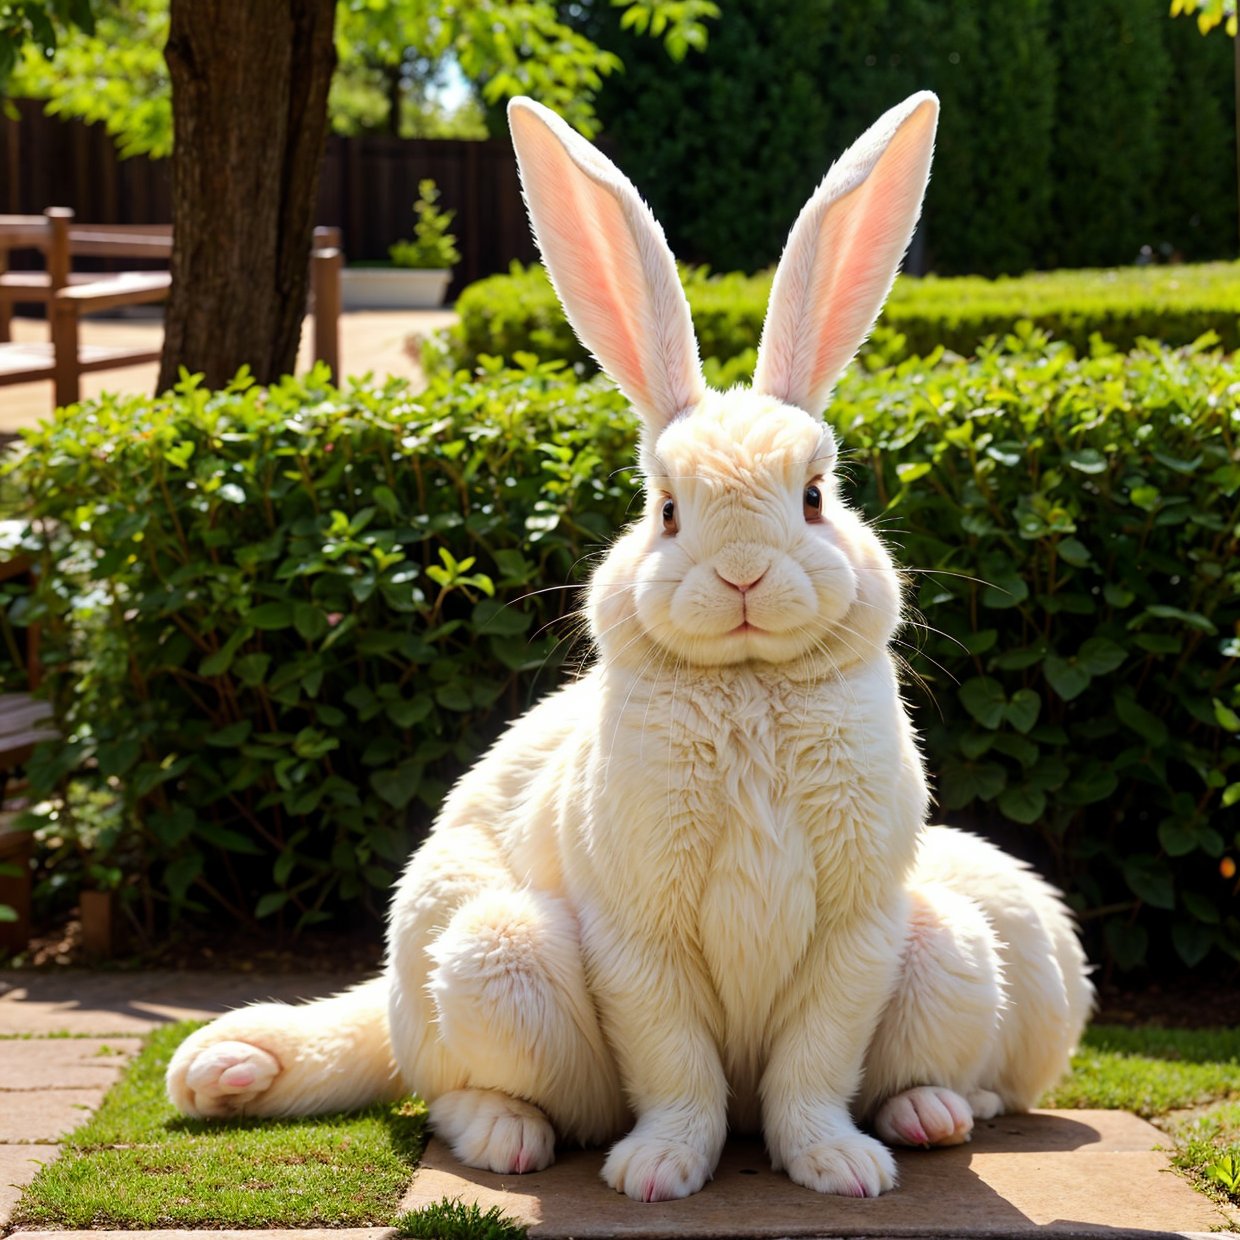 a rabbit with fluffy white fur, long rabbit ears, cute expression, sitting in a garden, outdoors, spring scenery, soft natural lighting, delicate details, photorealistic, award winning digital art, intricate fur textures, vibrant colors, cinematic composition,SD 1.5